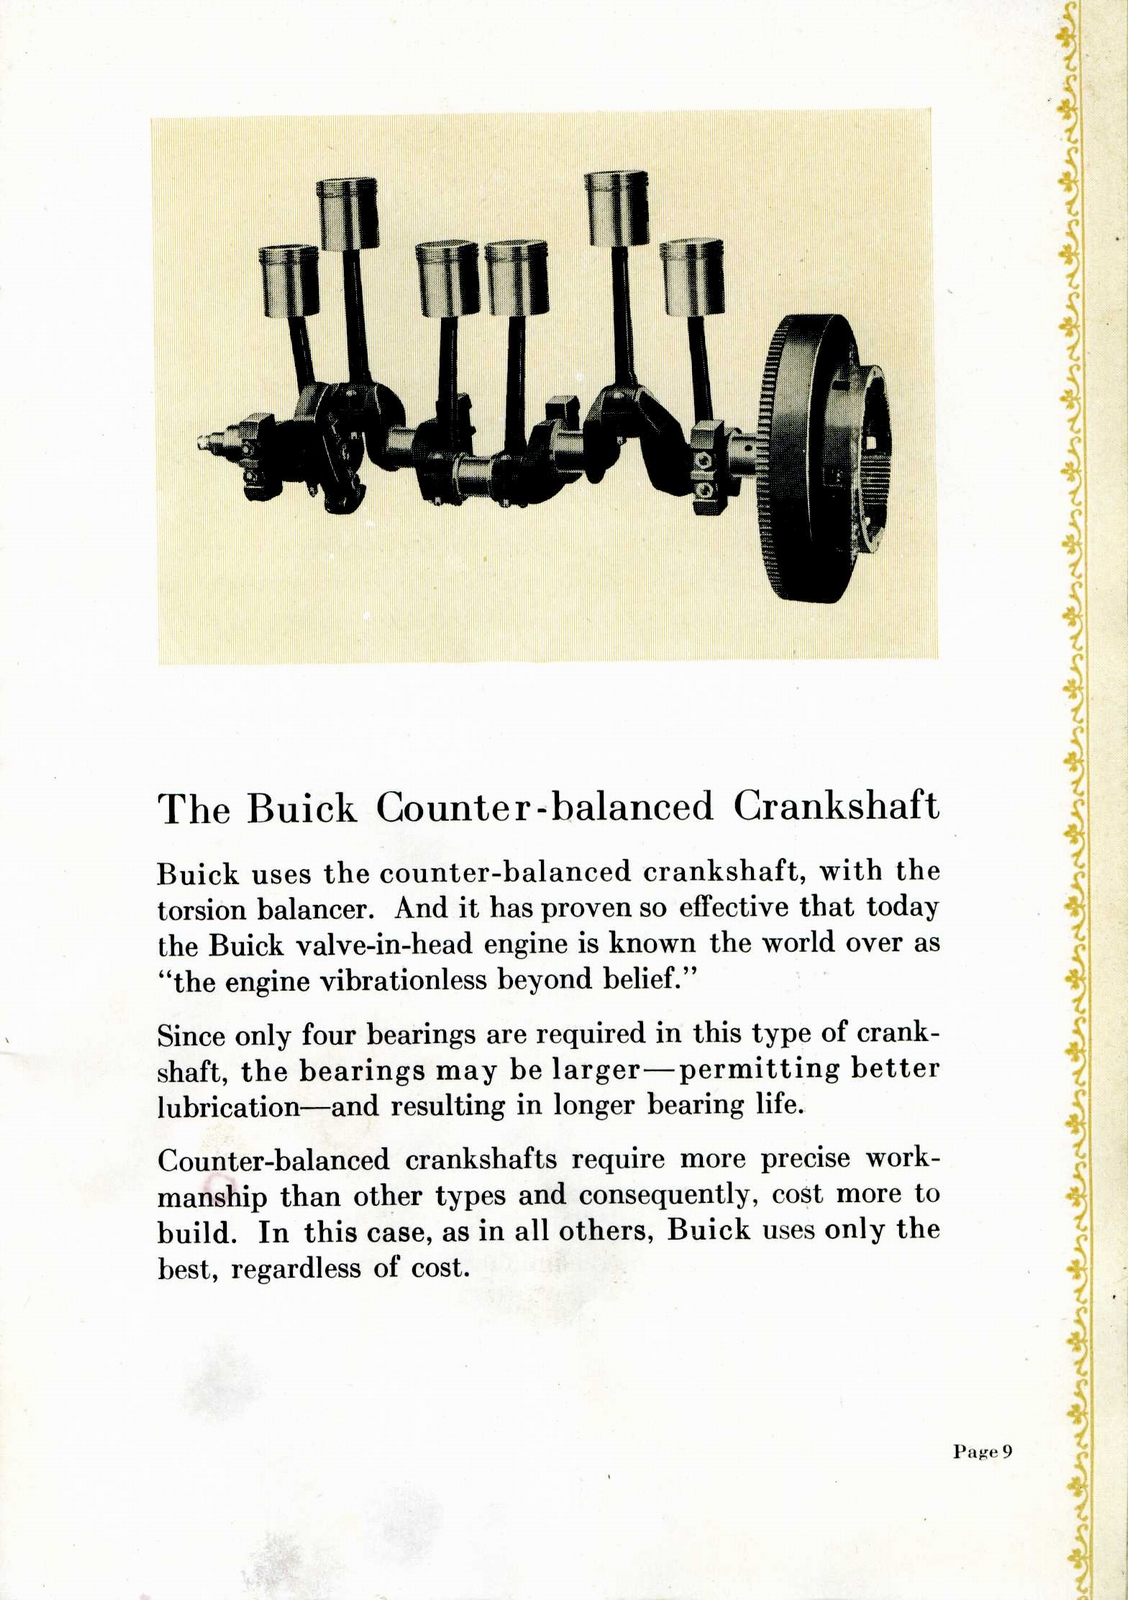 n_1928 Buick-How to Choose a Motor Car Wisely-09.jpg